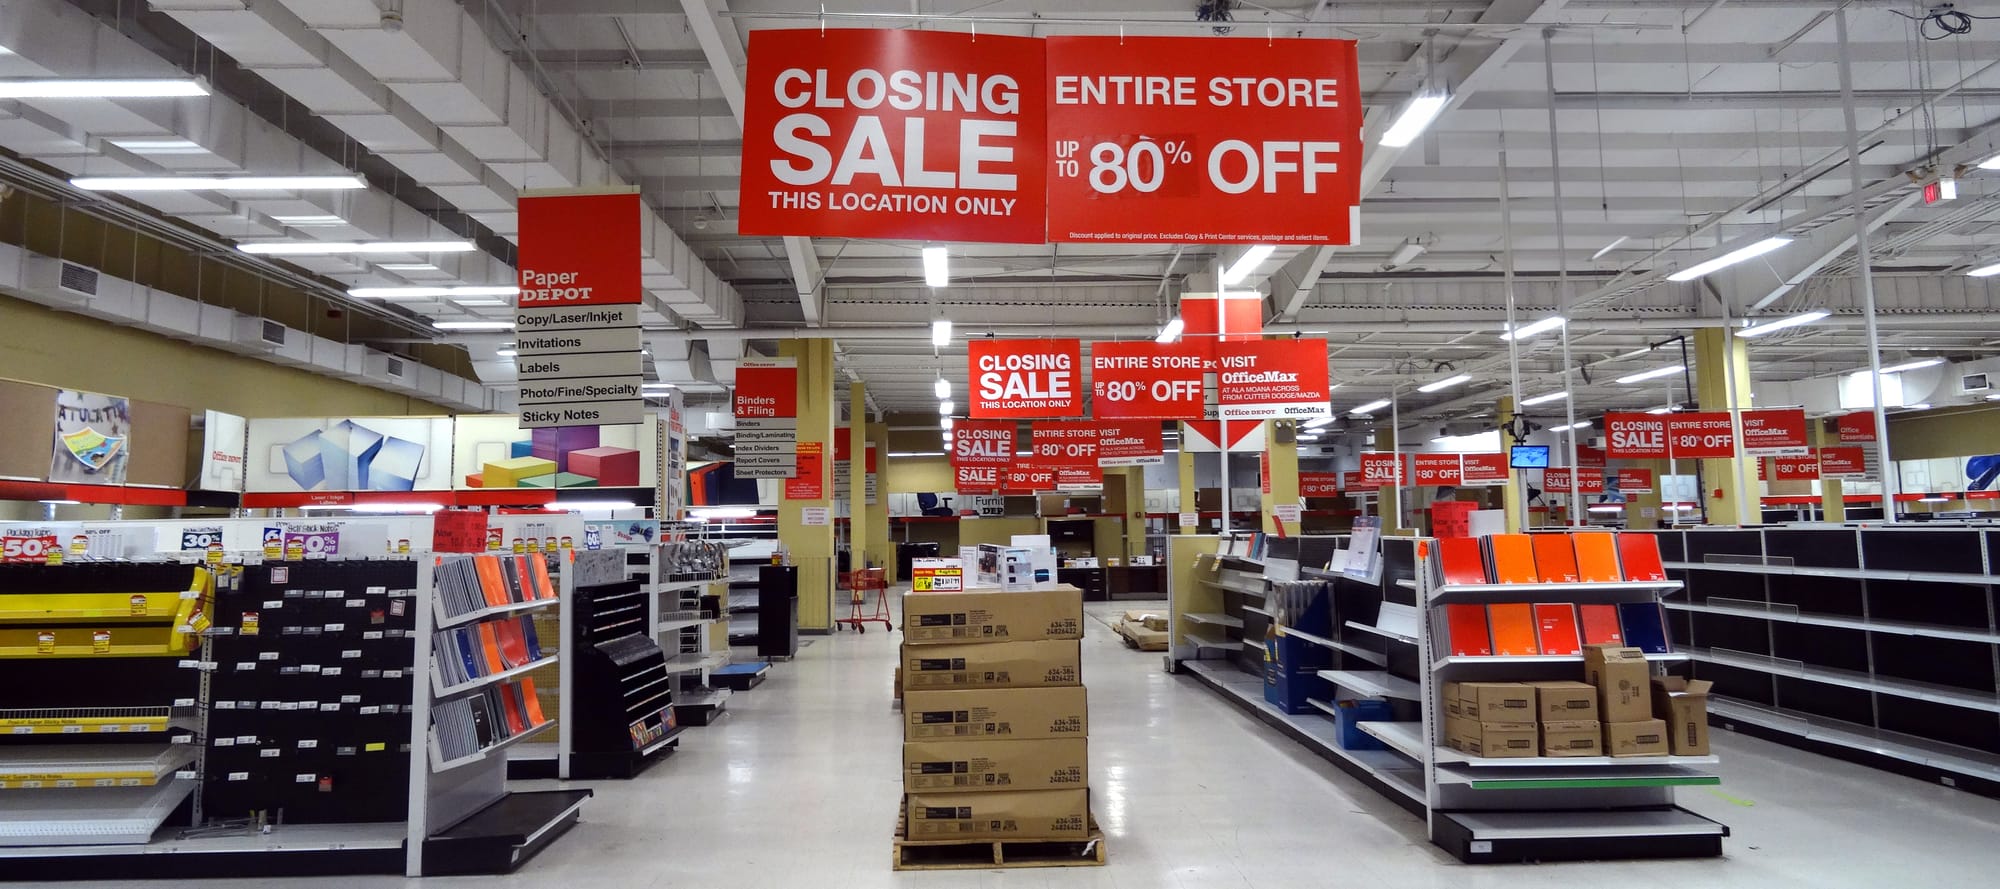 Photo of an office store with 'closing sale' signs displayed from the ceiling.